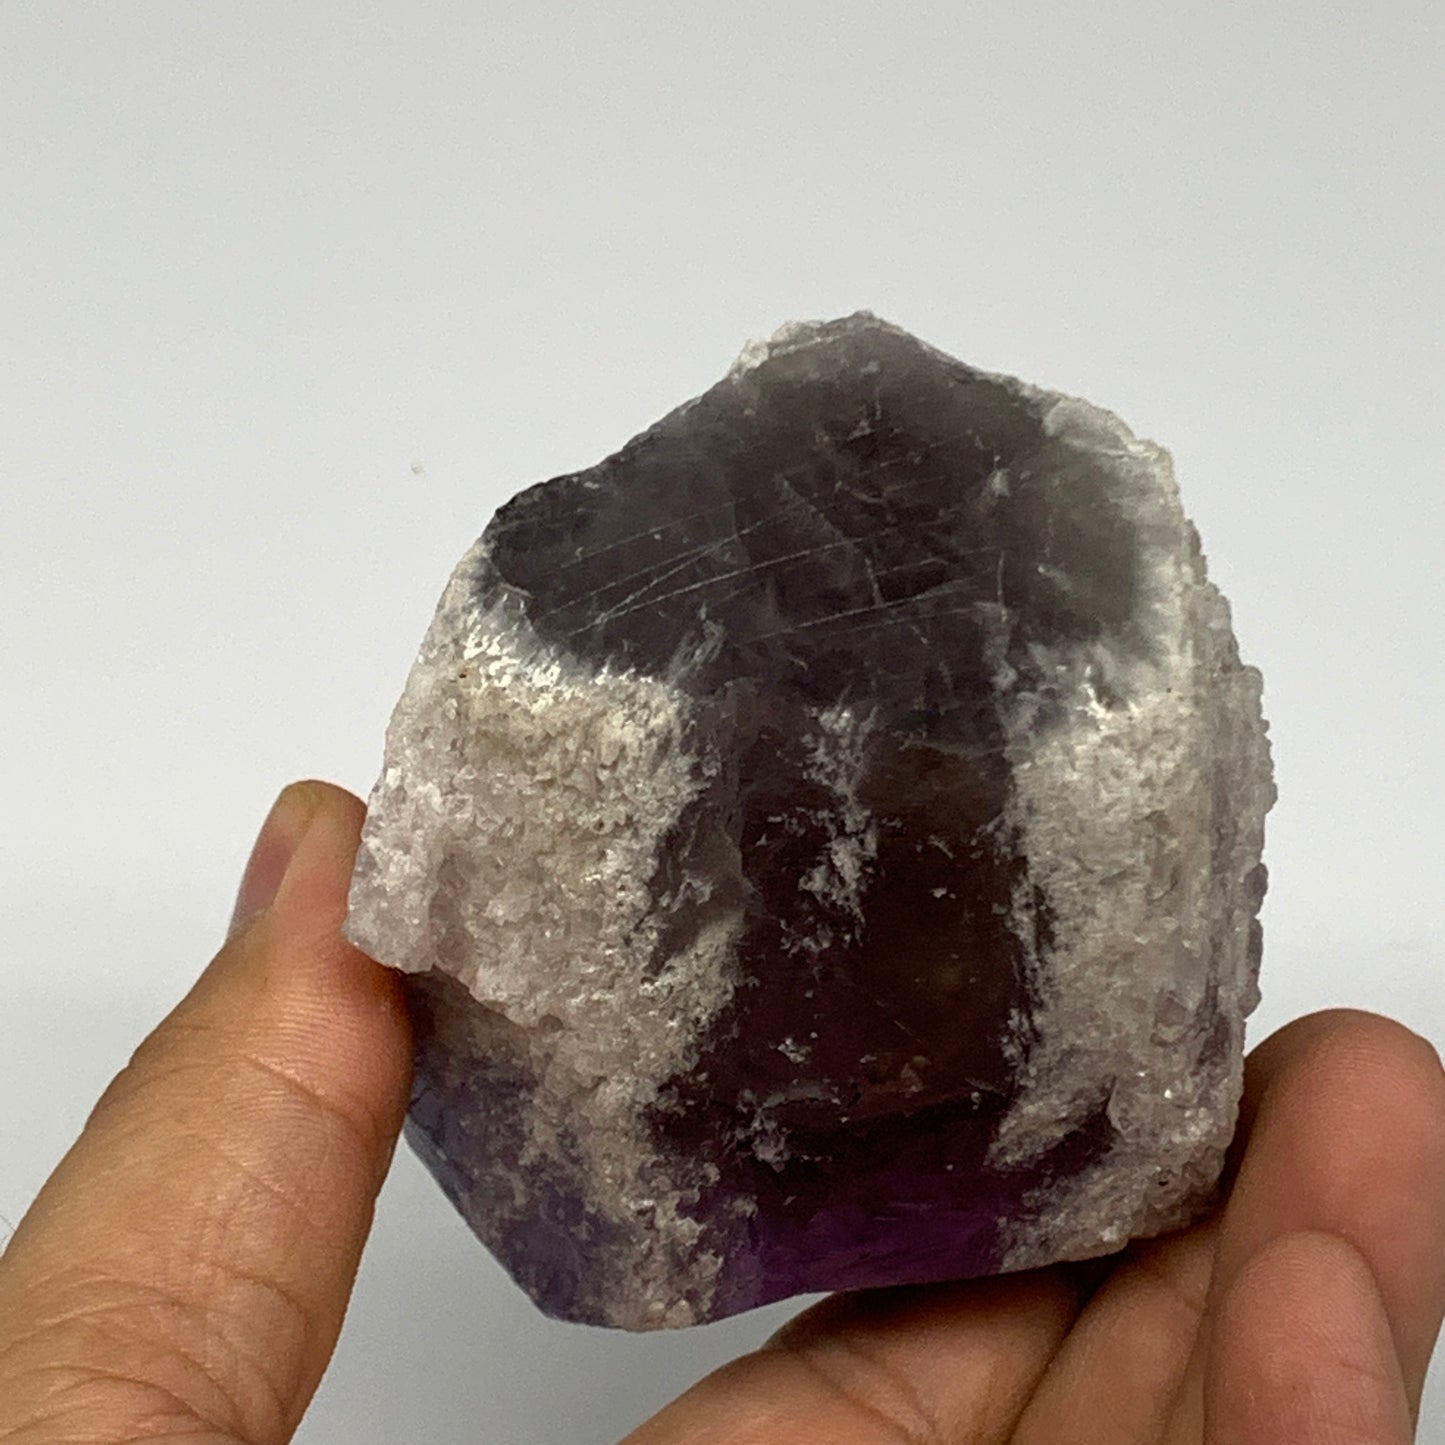 373.9g,3.7"x2.6"x2.1", Amethyst Point Polished Rough lower part Stands, B19072